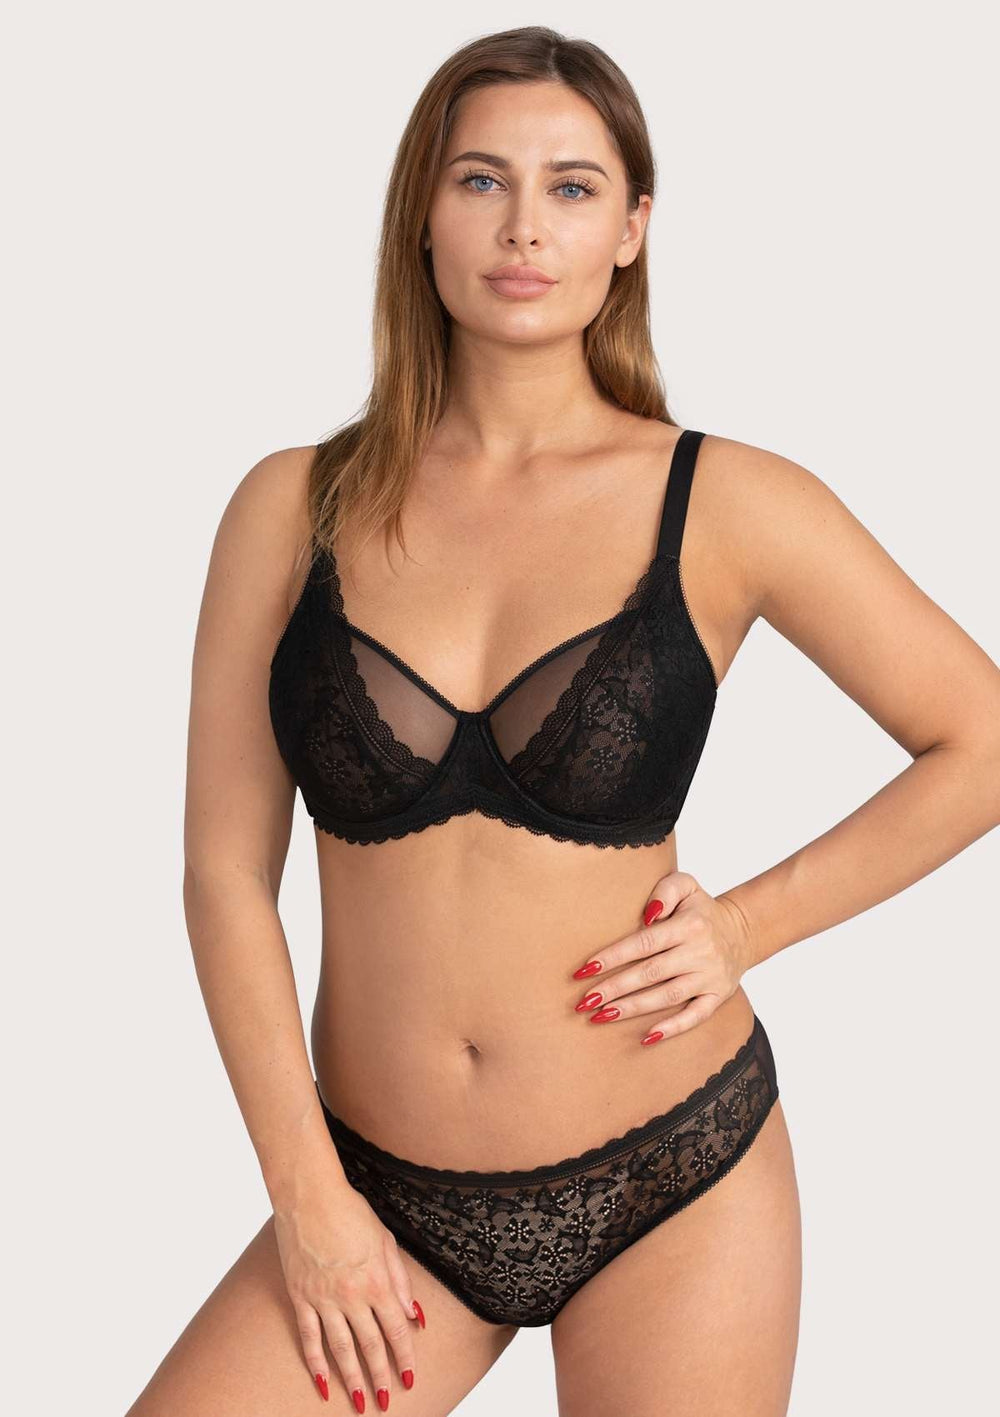 HSIA Anemone Lace Bra and Panties: Back Support Wired Bra